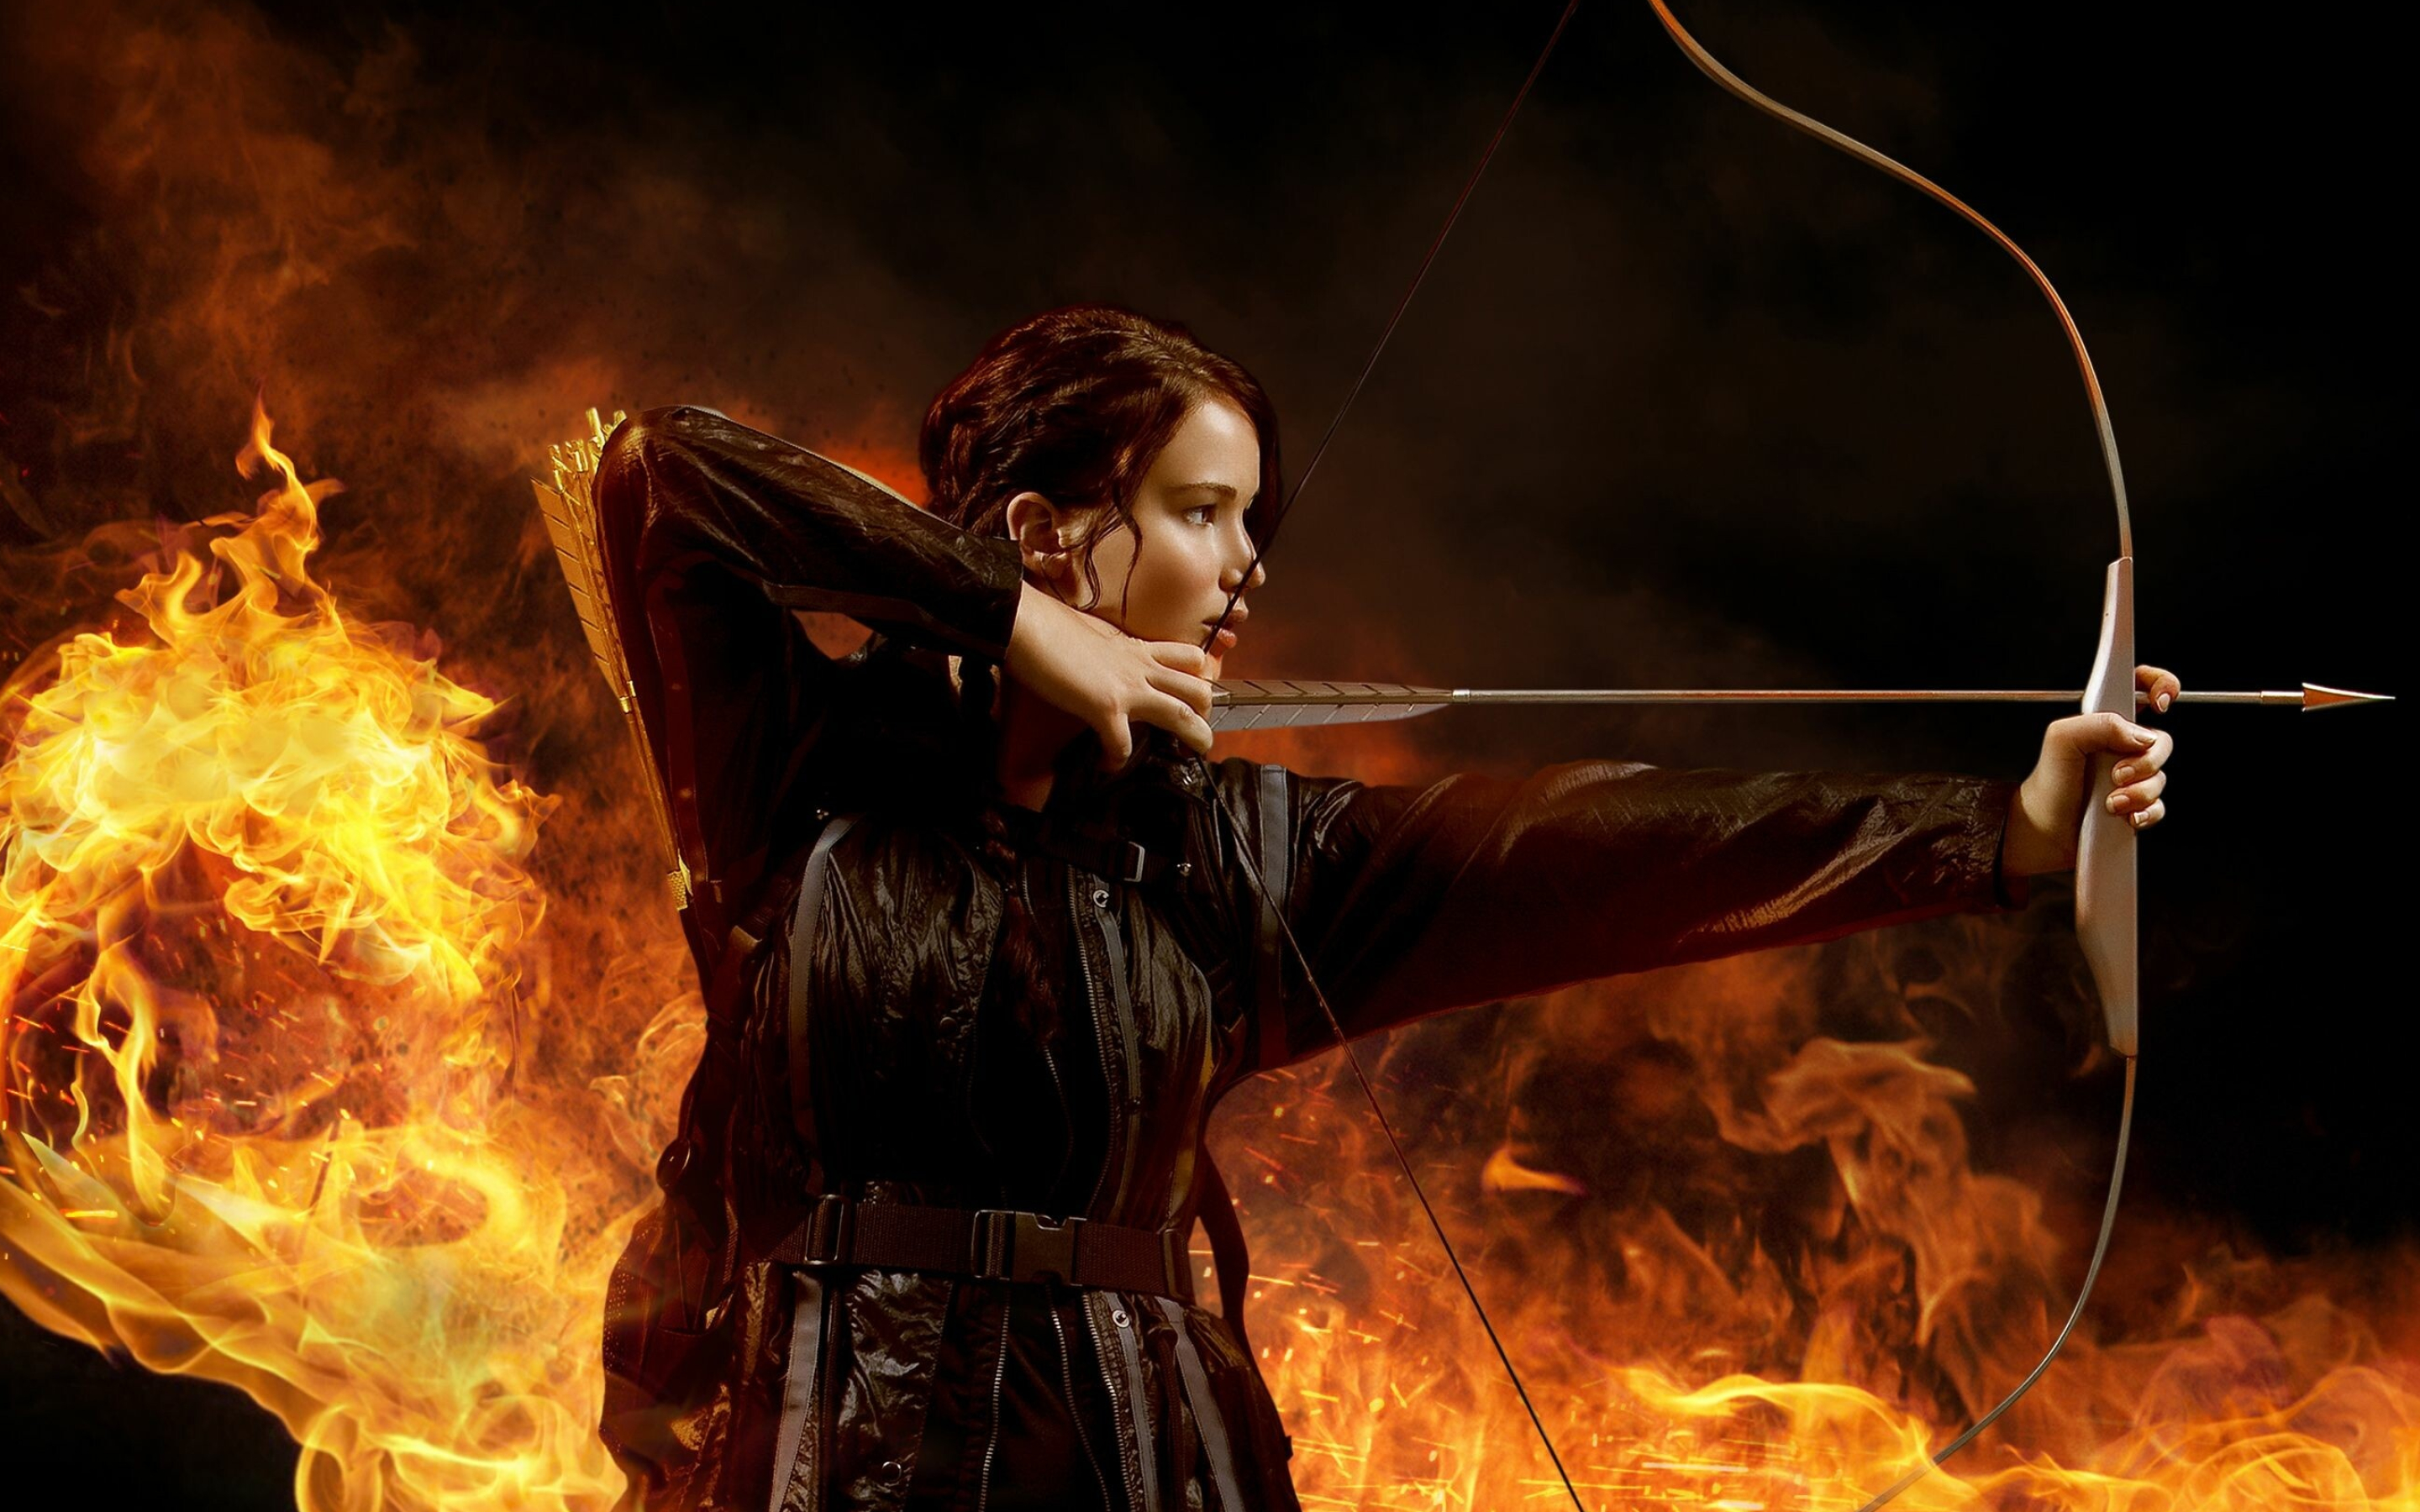 Jennifer Lawrence, The Hunger Games, PC and mobile wallpapers, 2880x1800 HD Desktop